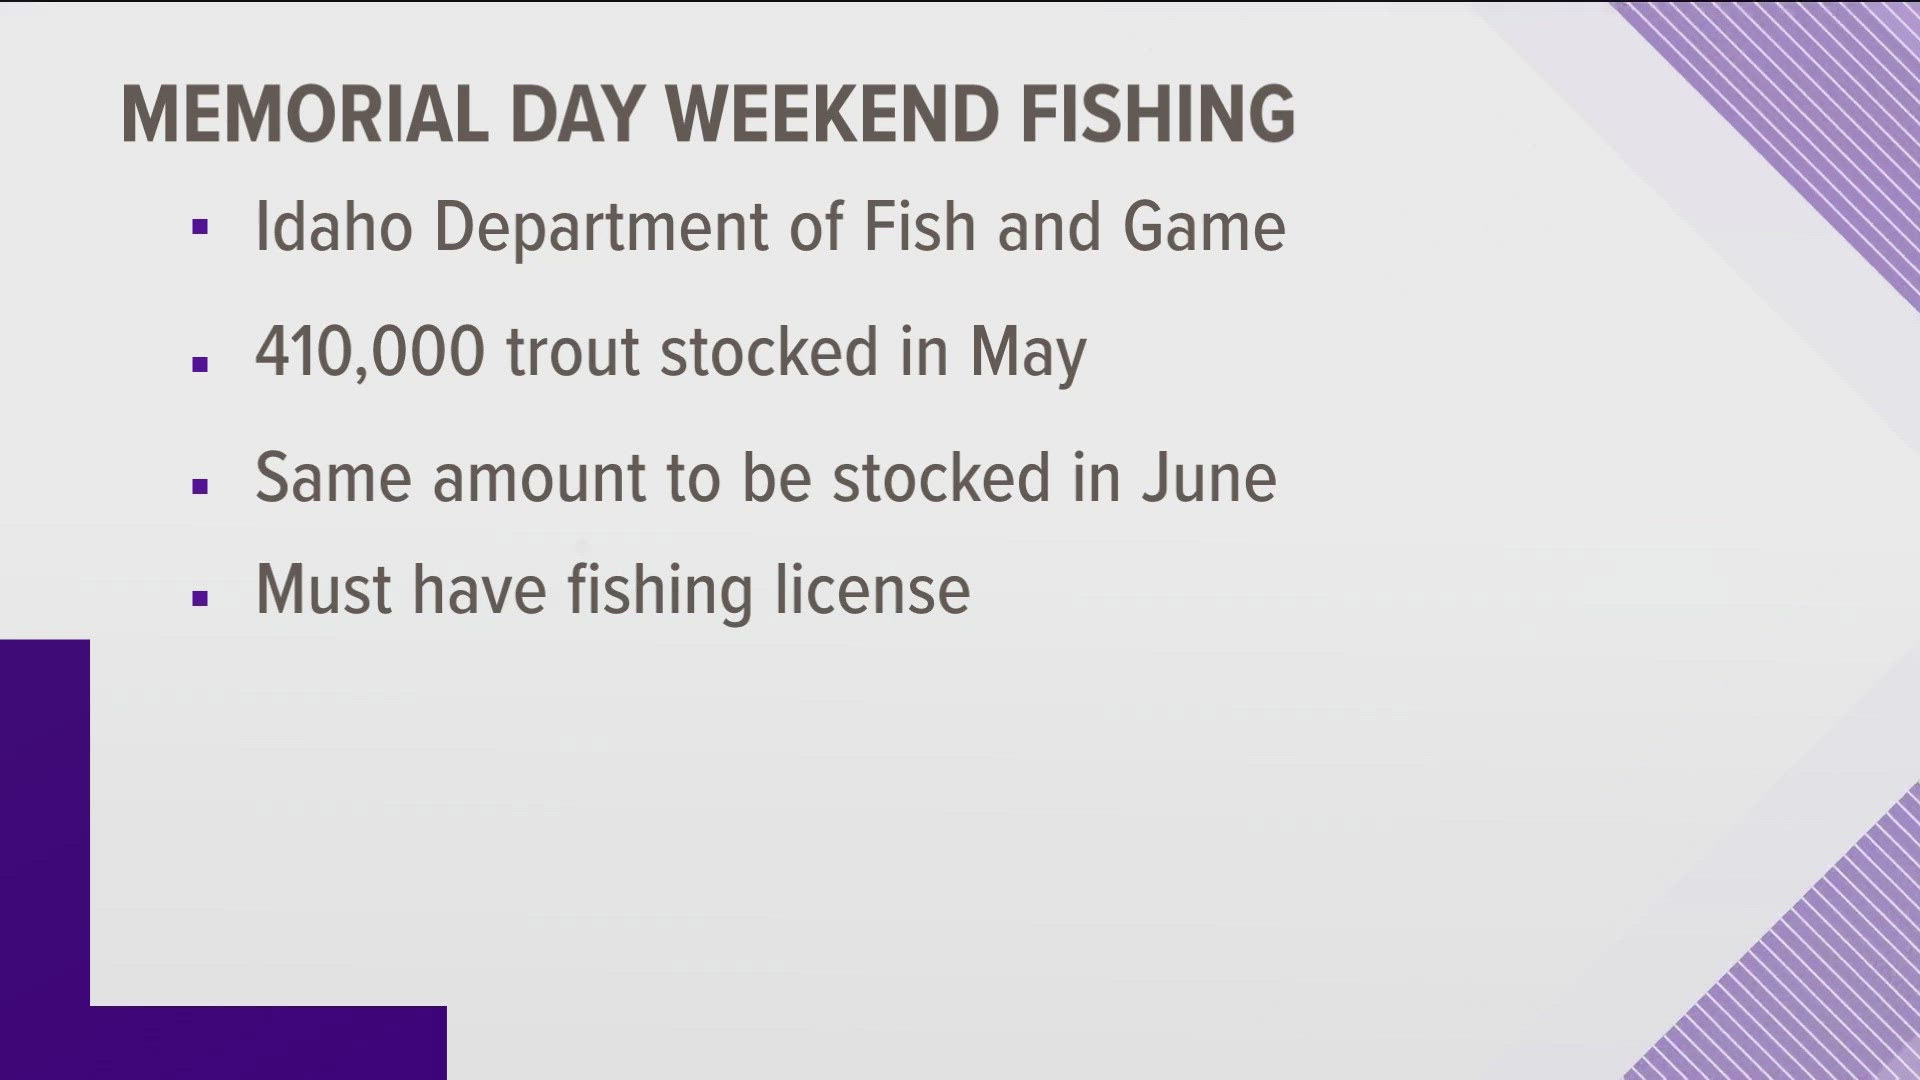 No bass-lighting, Memorial Day weekend is often the first weekend people camp or go fishing.